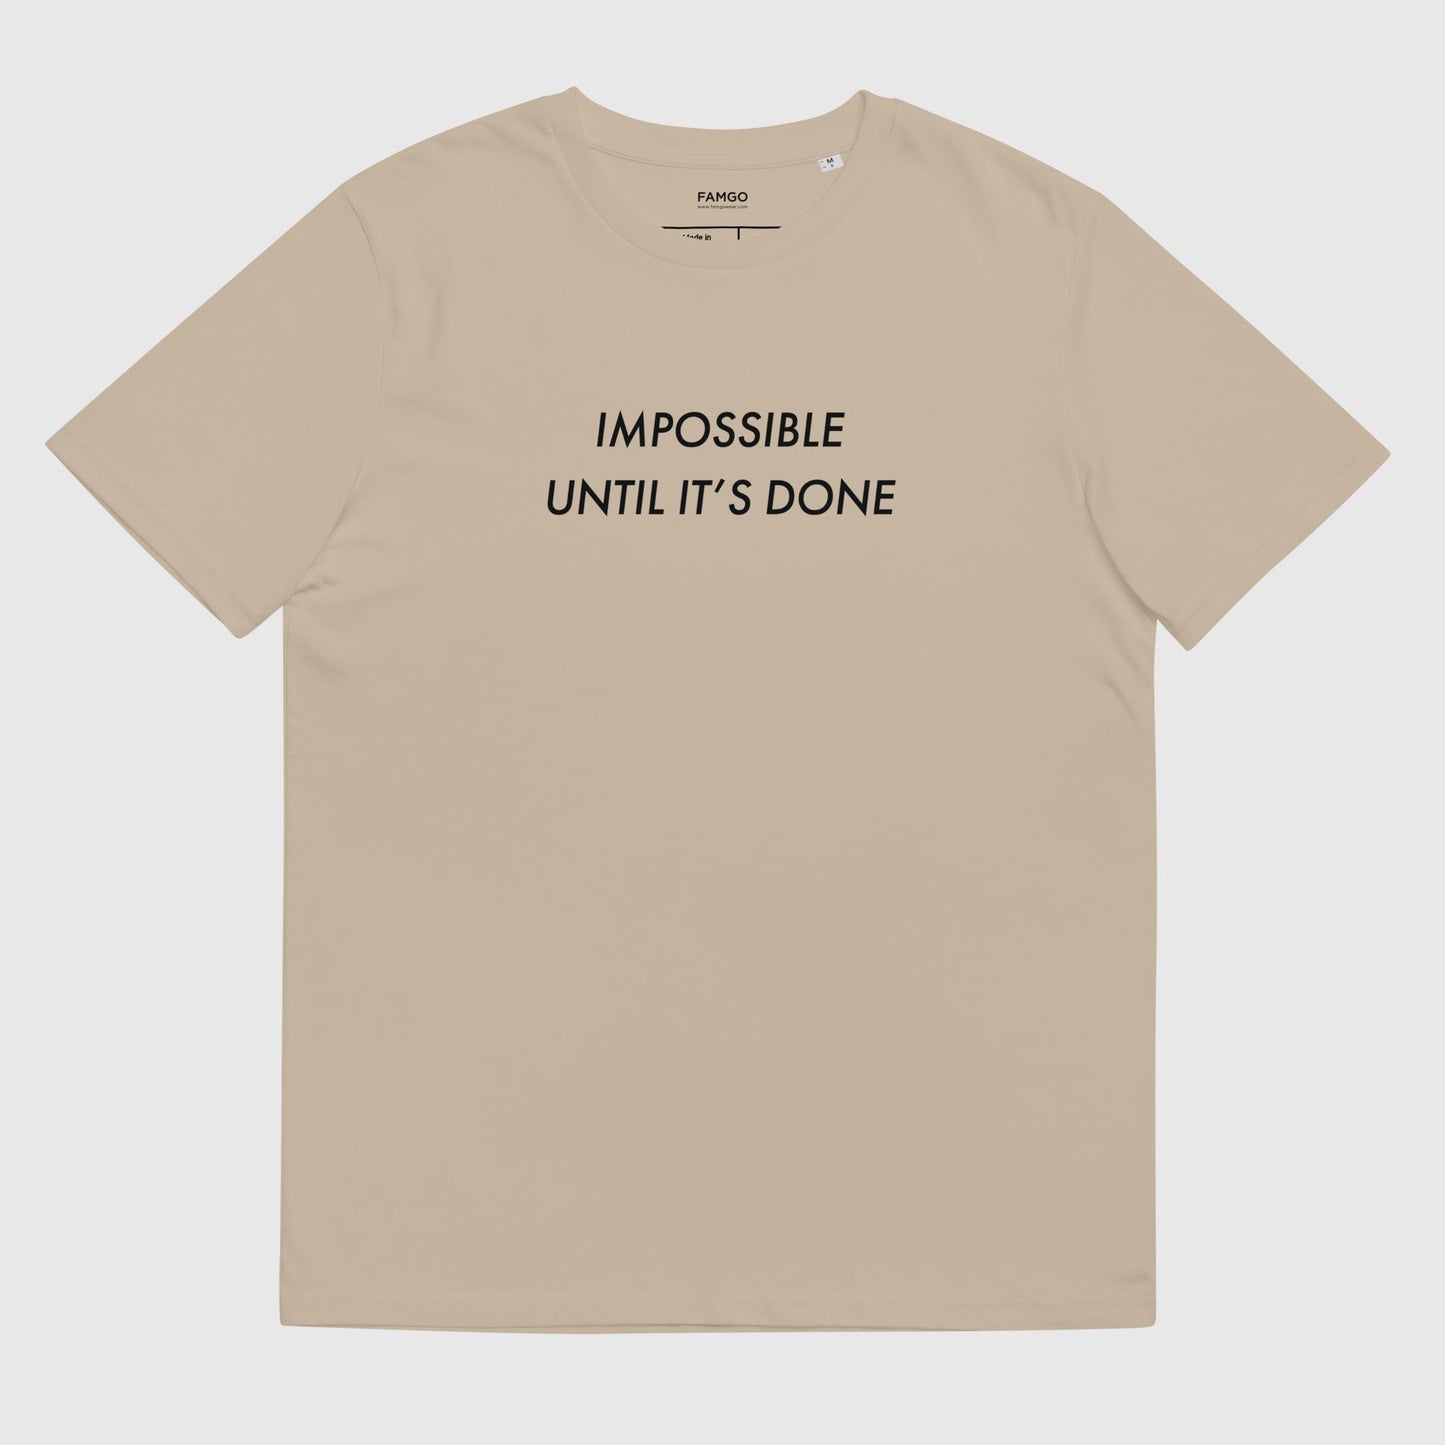 Men's desert dust organic cotton t-shirt that features, "Impossible Until It's Done," inspired by Nelson Mandela's inspirational quote, "It always seems impossible until it's done."